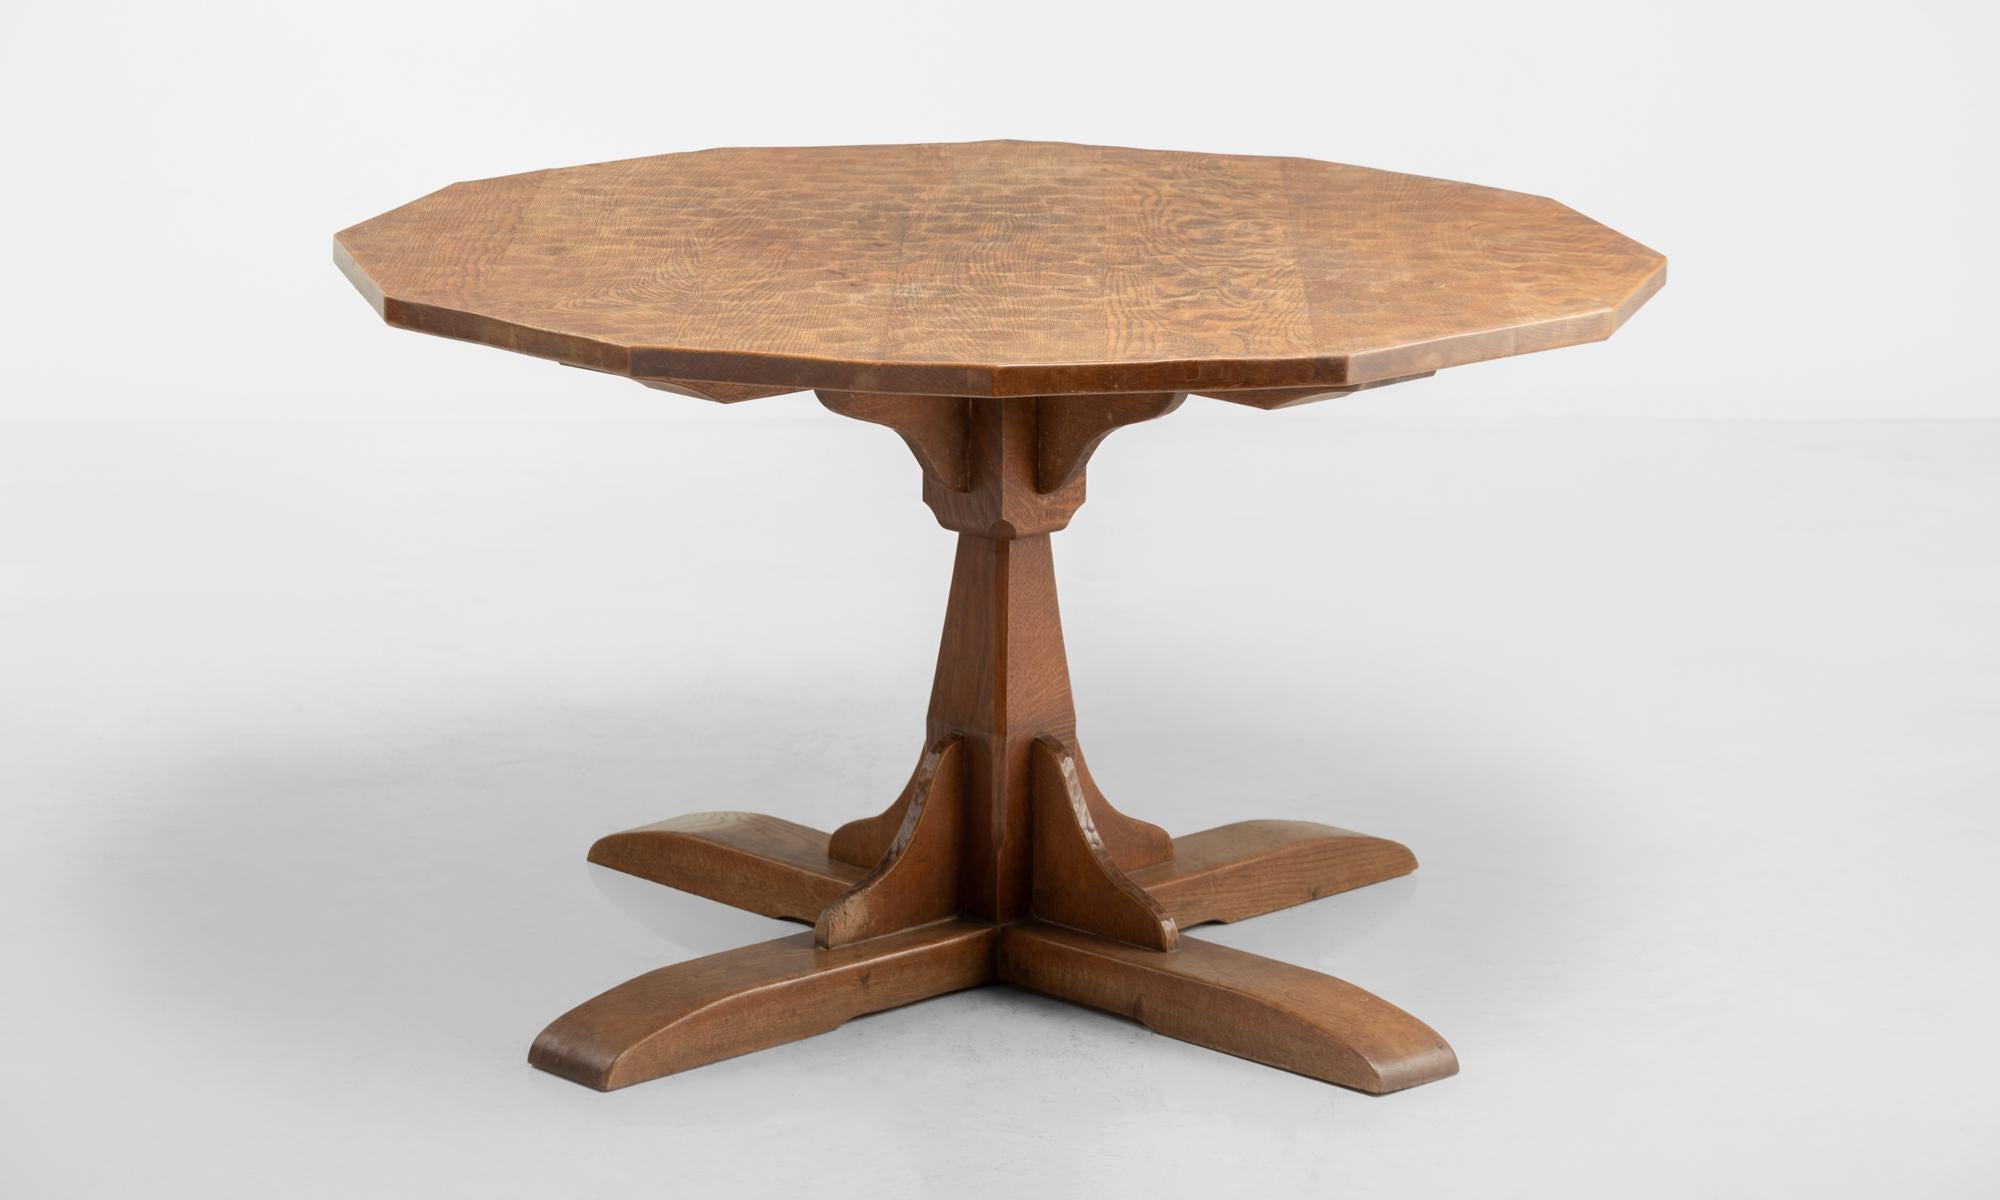 Unique form includes a twelve sided table top with subtle carved pattern motif.

Made in England circa 1930.